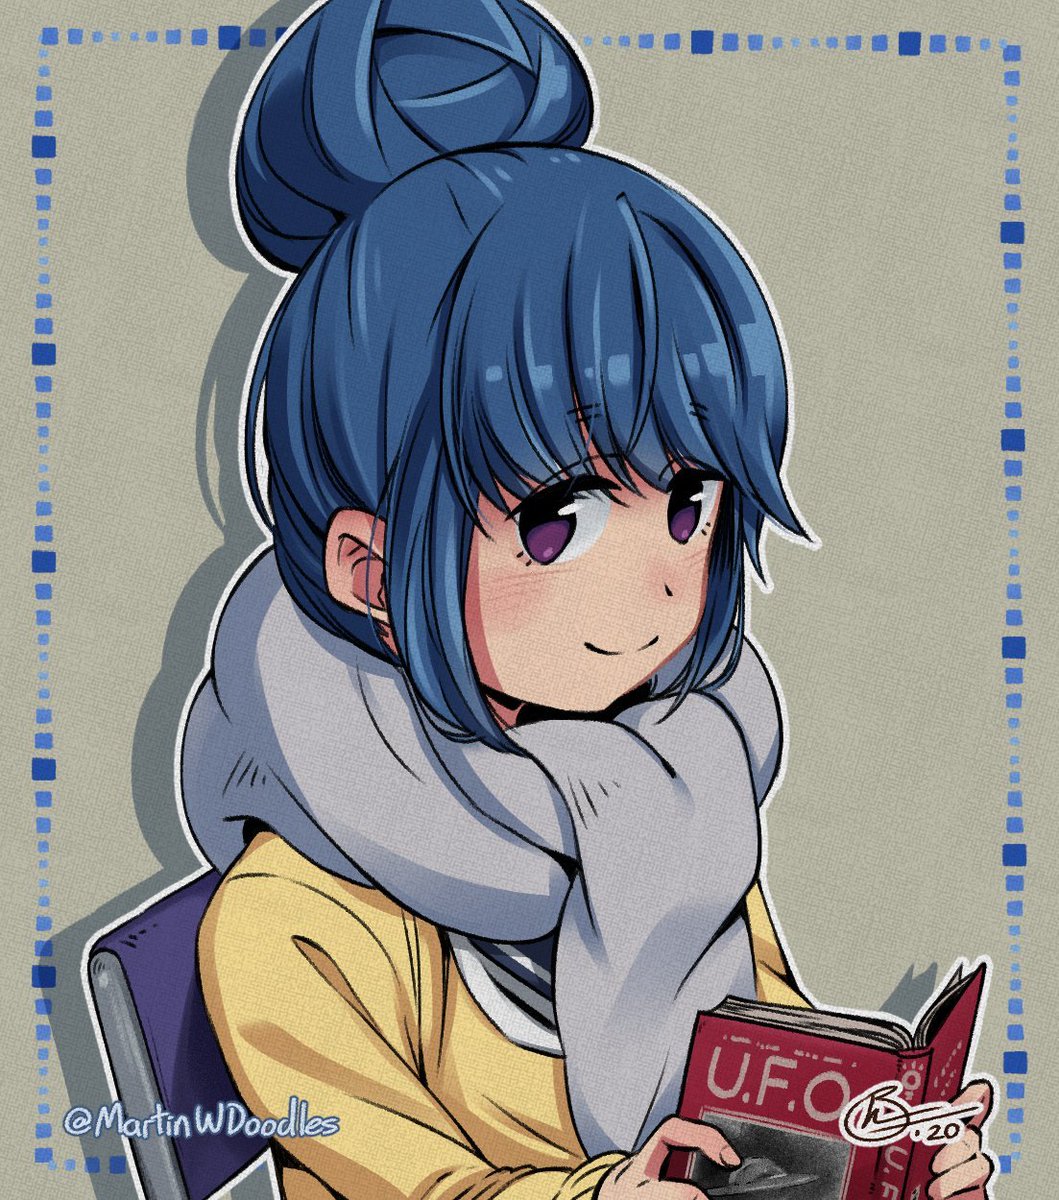 @celezperez I can't begin to describe how happy I am with how you've portrayed my dear Shimarin! She's the character I was most worried about due to how important she is to me but I am BEYOND ecstatic! 
Thank you so much~!! 💙✨⛺️
(And please accept some of my past fan art!) 